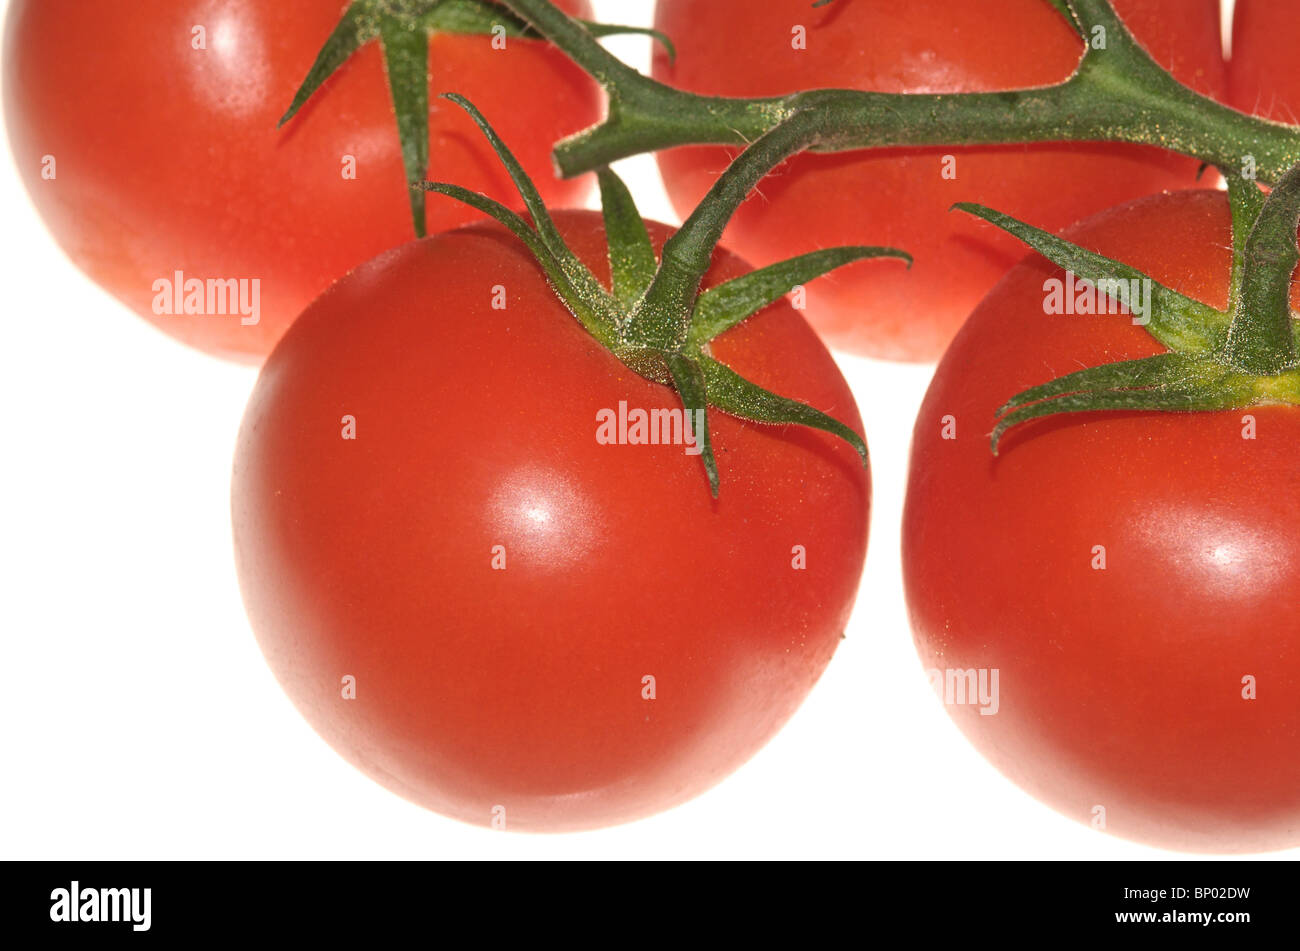 Cut-out images of tomatoes Stock Photo